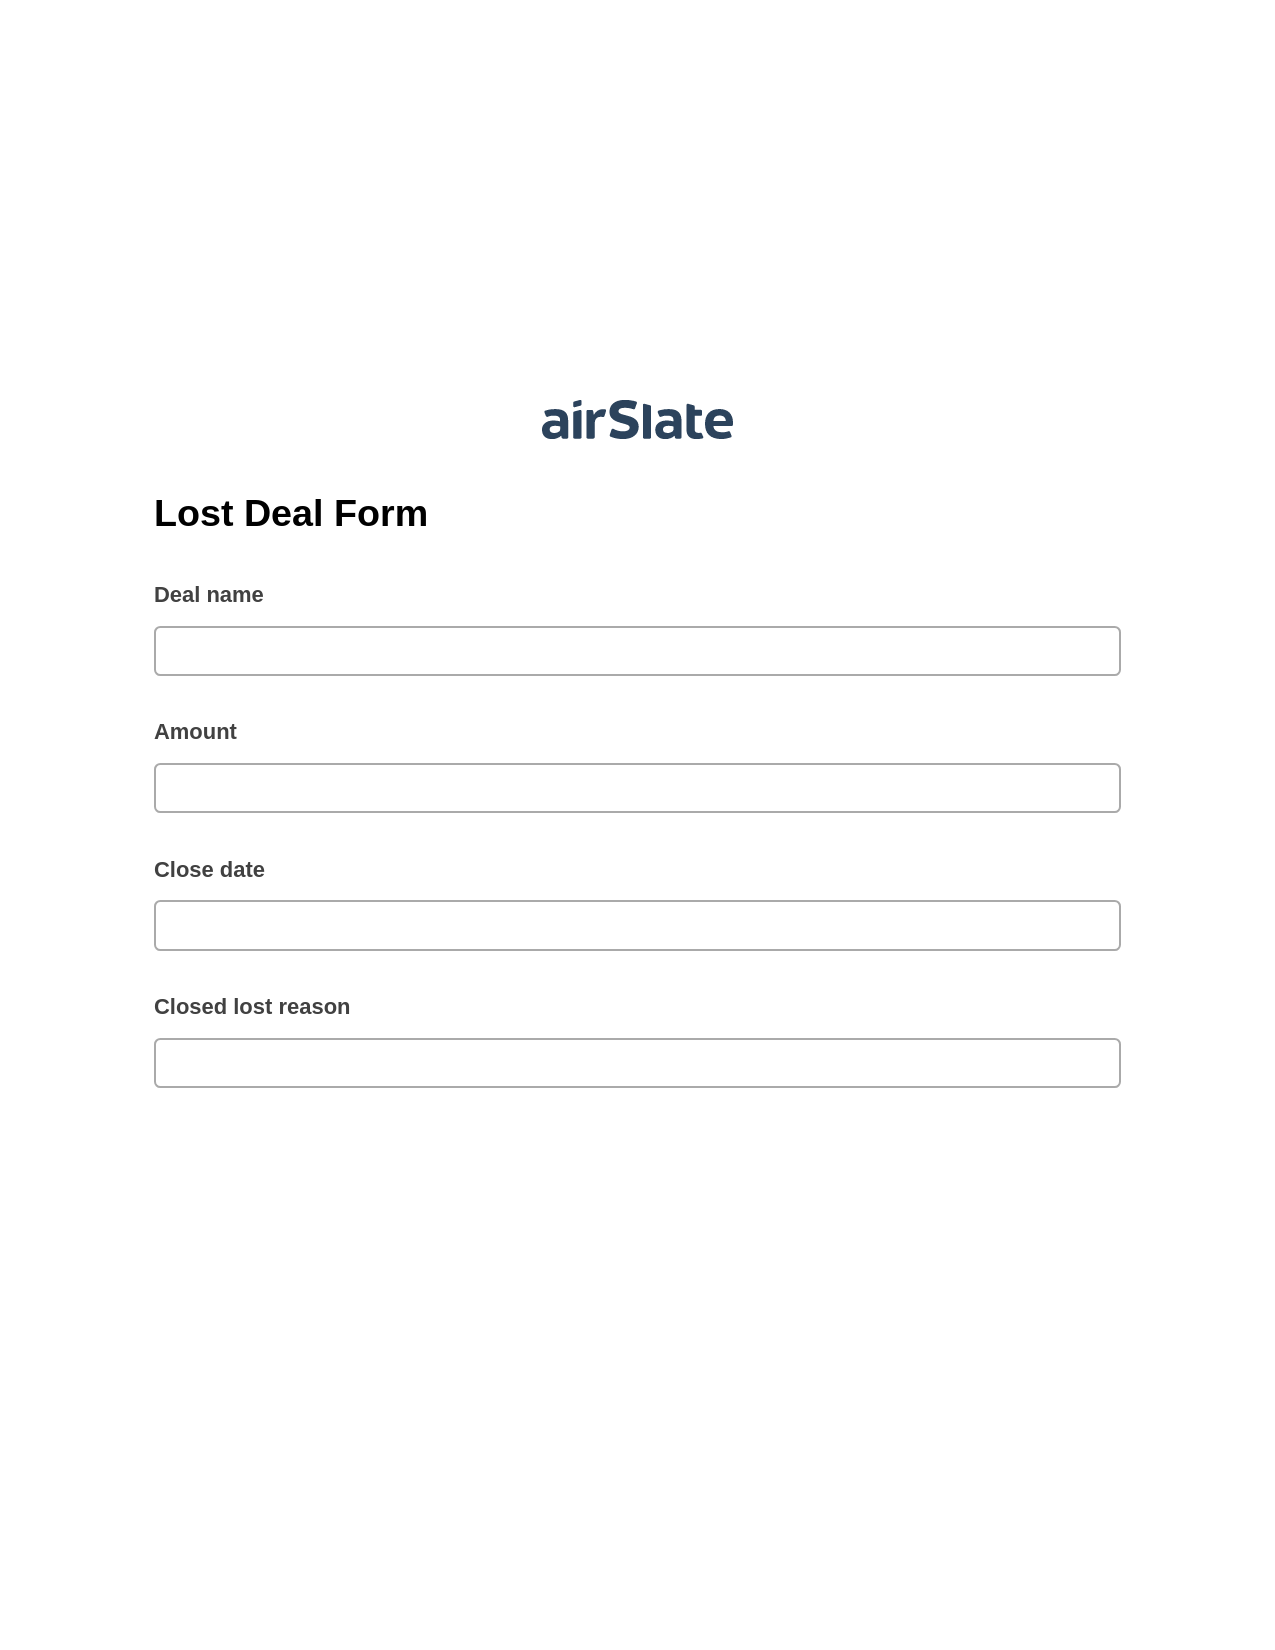 Lost Deal Form Pre-fill from Excel Spreadsheet Bot, Send a Slate to MS Dynamics 365 Contact Bot, Archive to OneDrive Bot